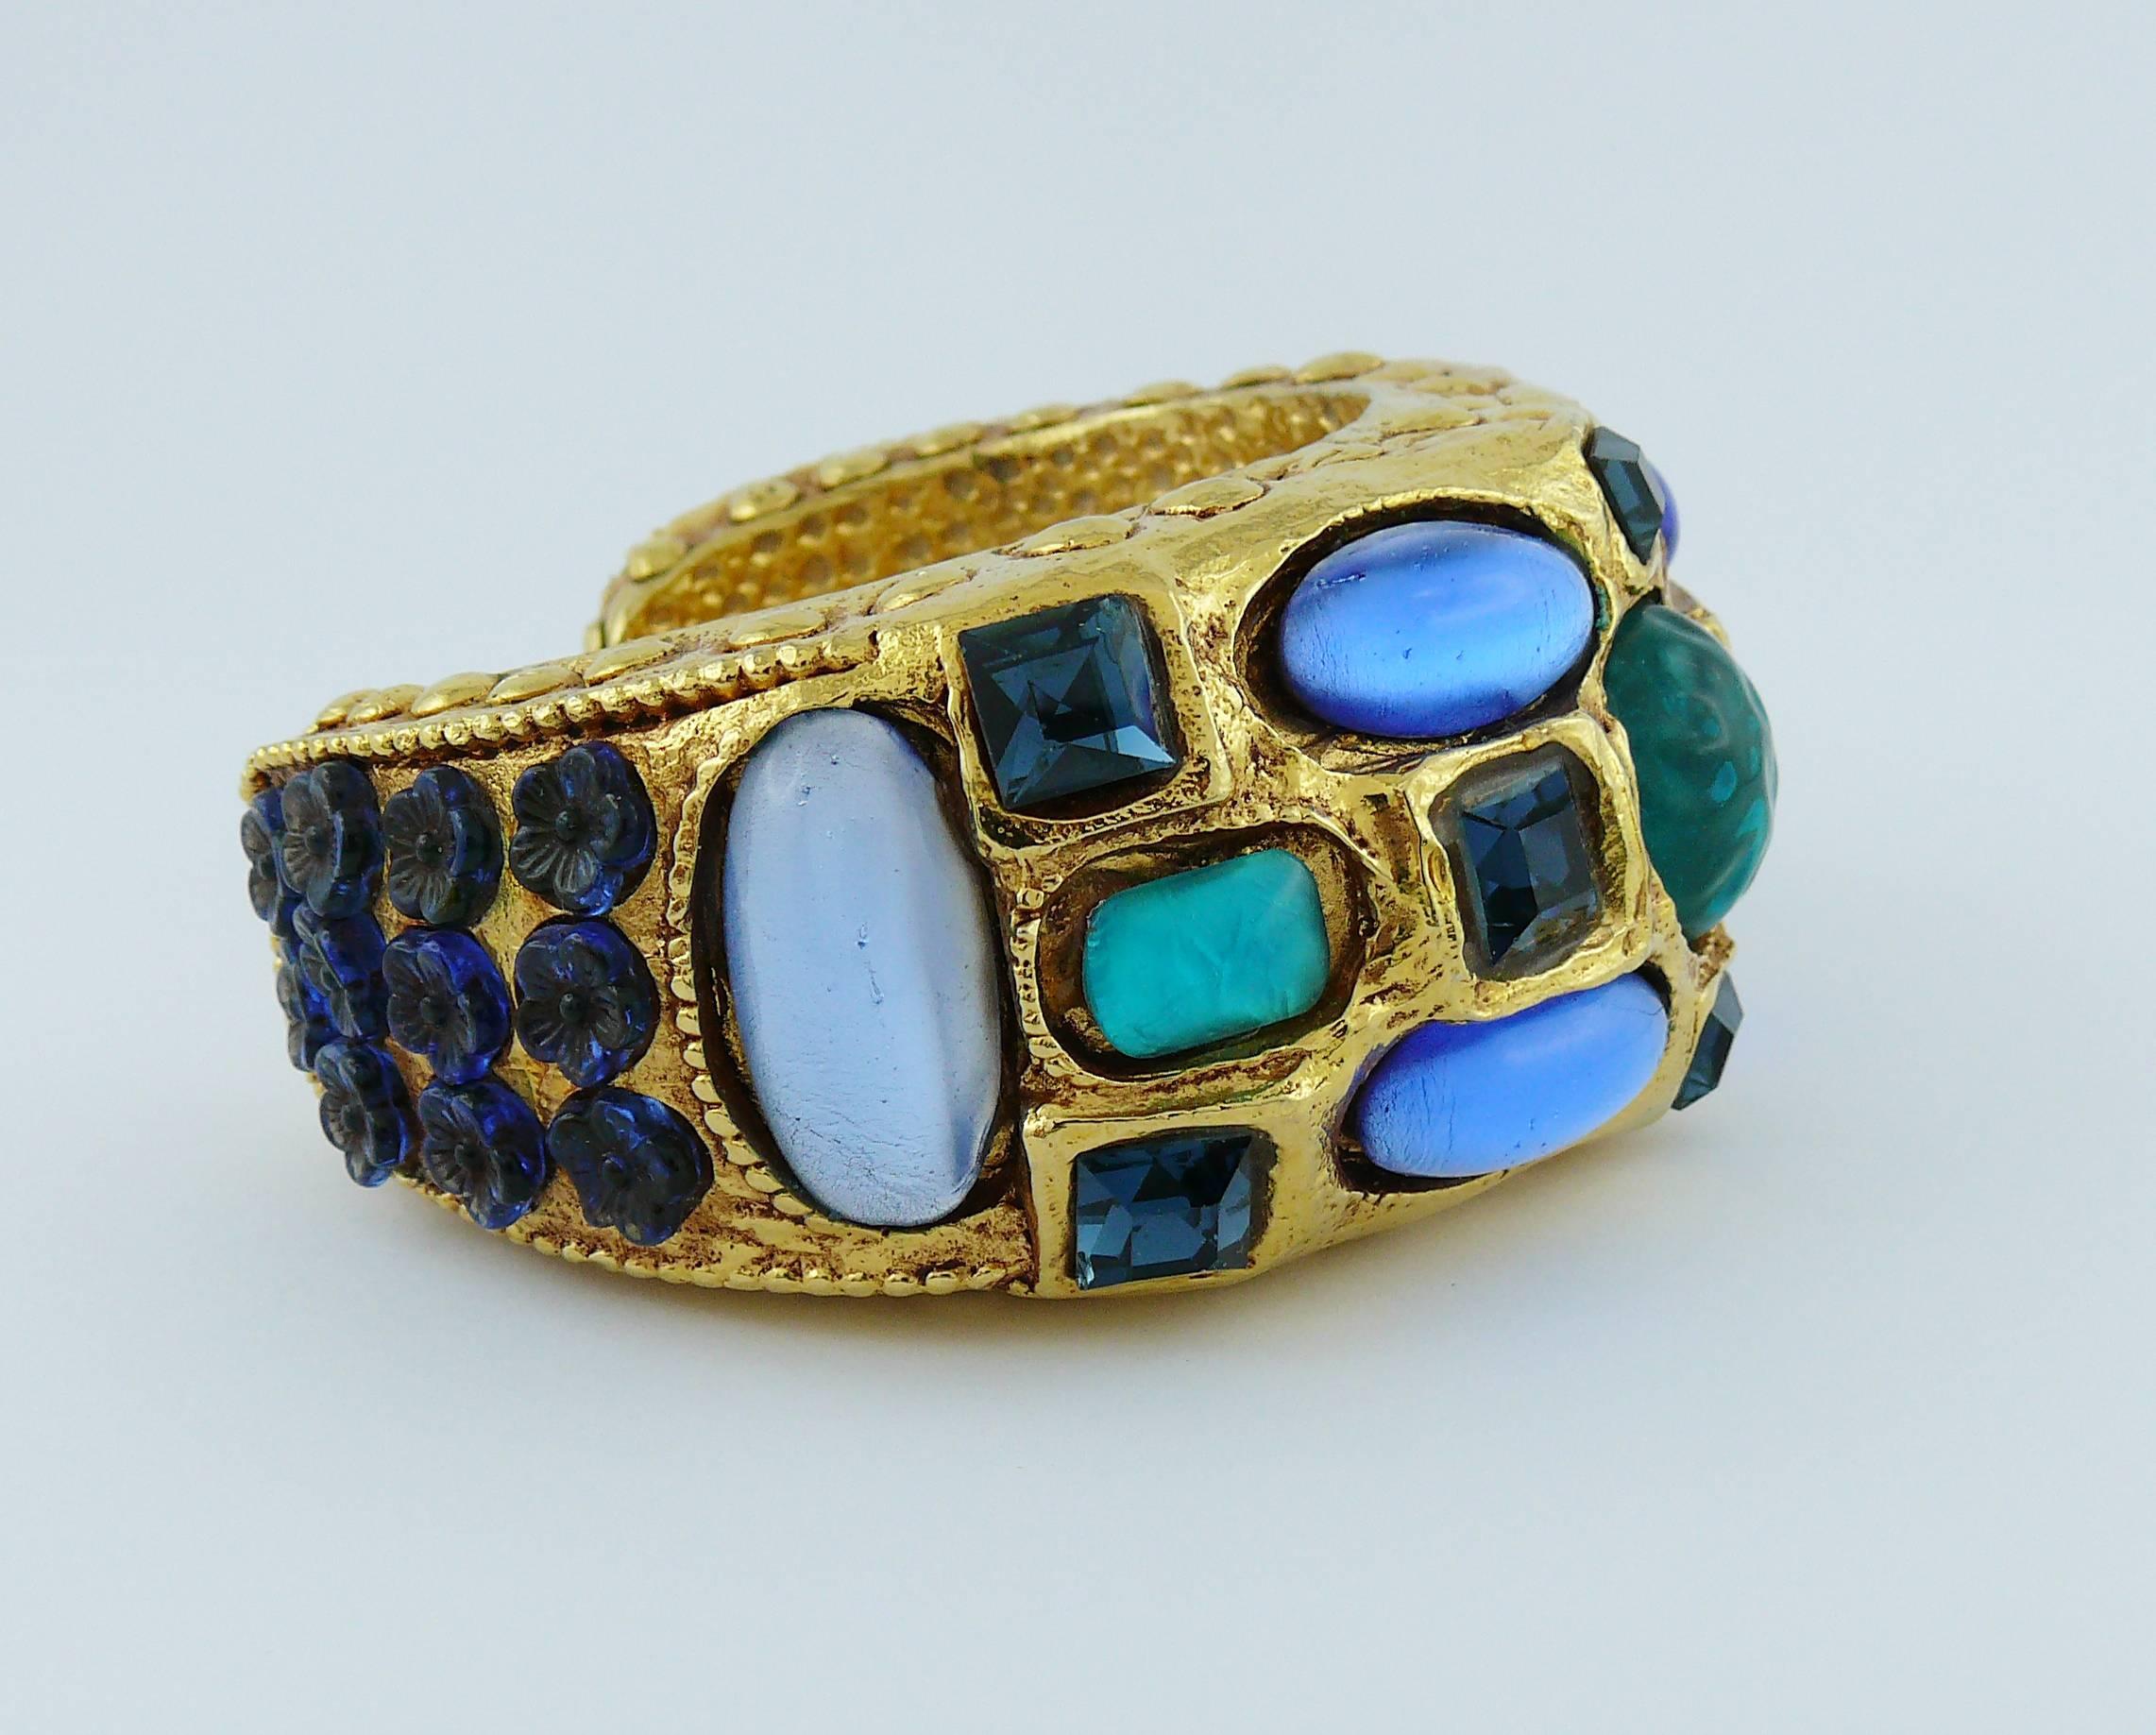 KALINGER vintage gold toned cuff bracelet embellished with blue crystals, blue glass flowers, glass and resin cabochons.

Marked KALINGER.

Indicative measurements : inner circumference approx. 16.65 cm (6.56 inches) / max width approx. 3.6 cm (1.42